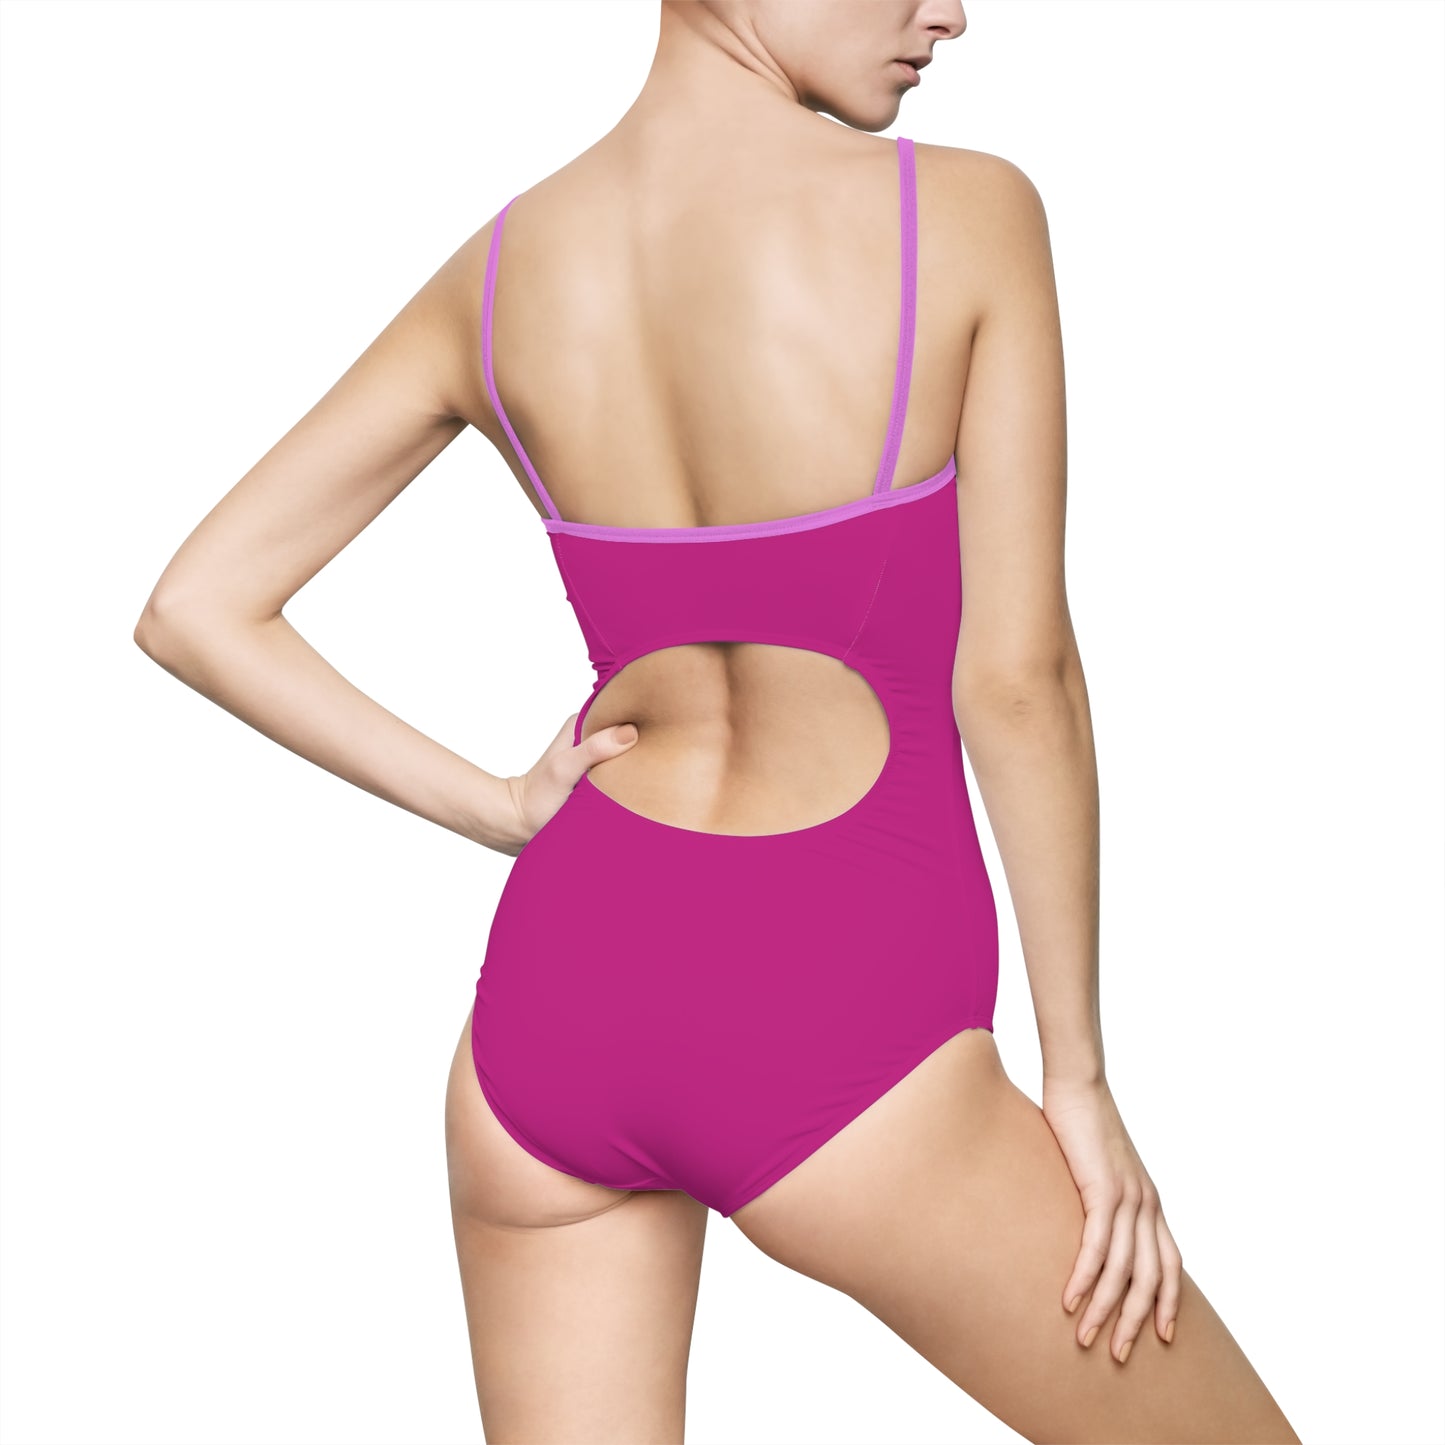 Rep the Y Women's One-piece Swimsuit